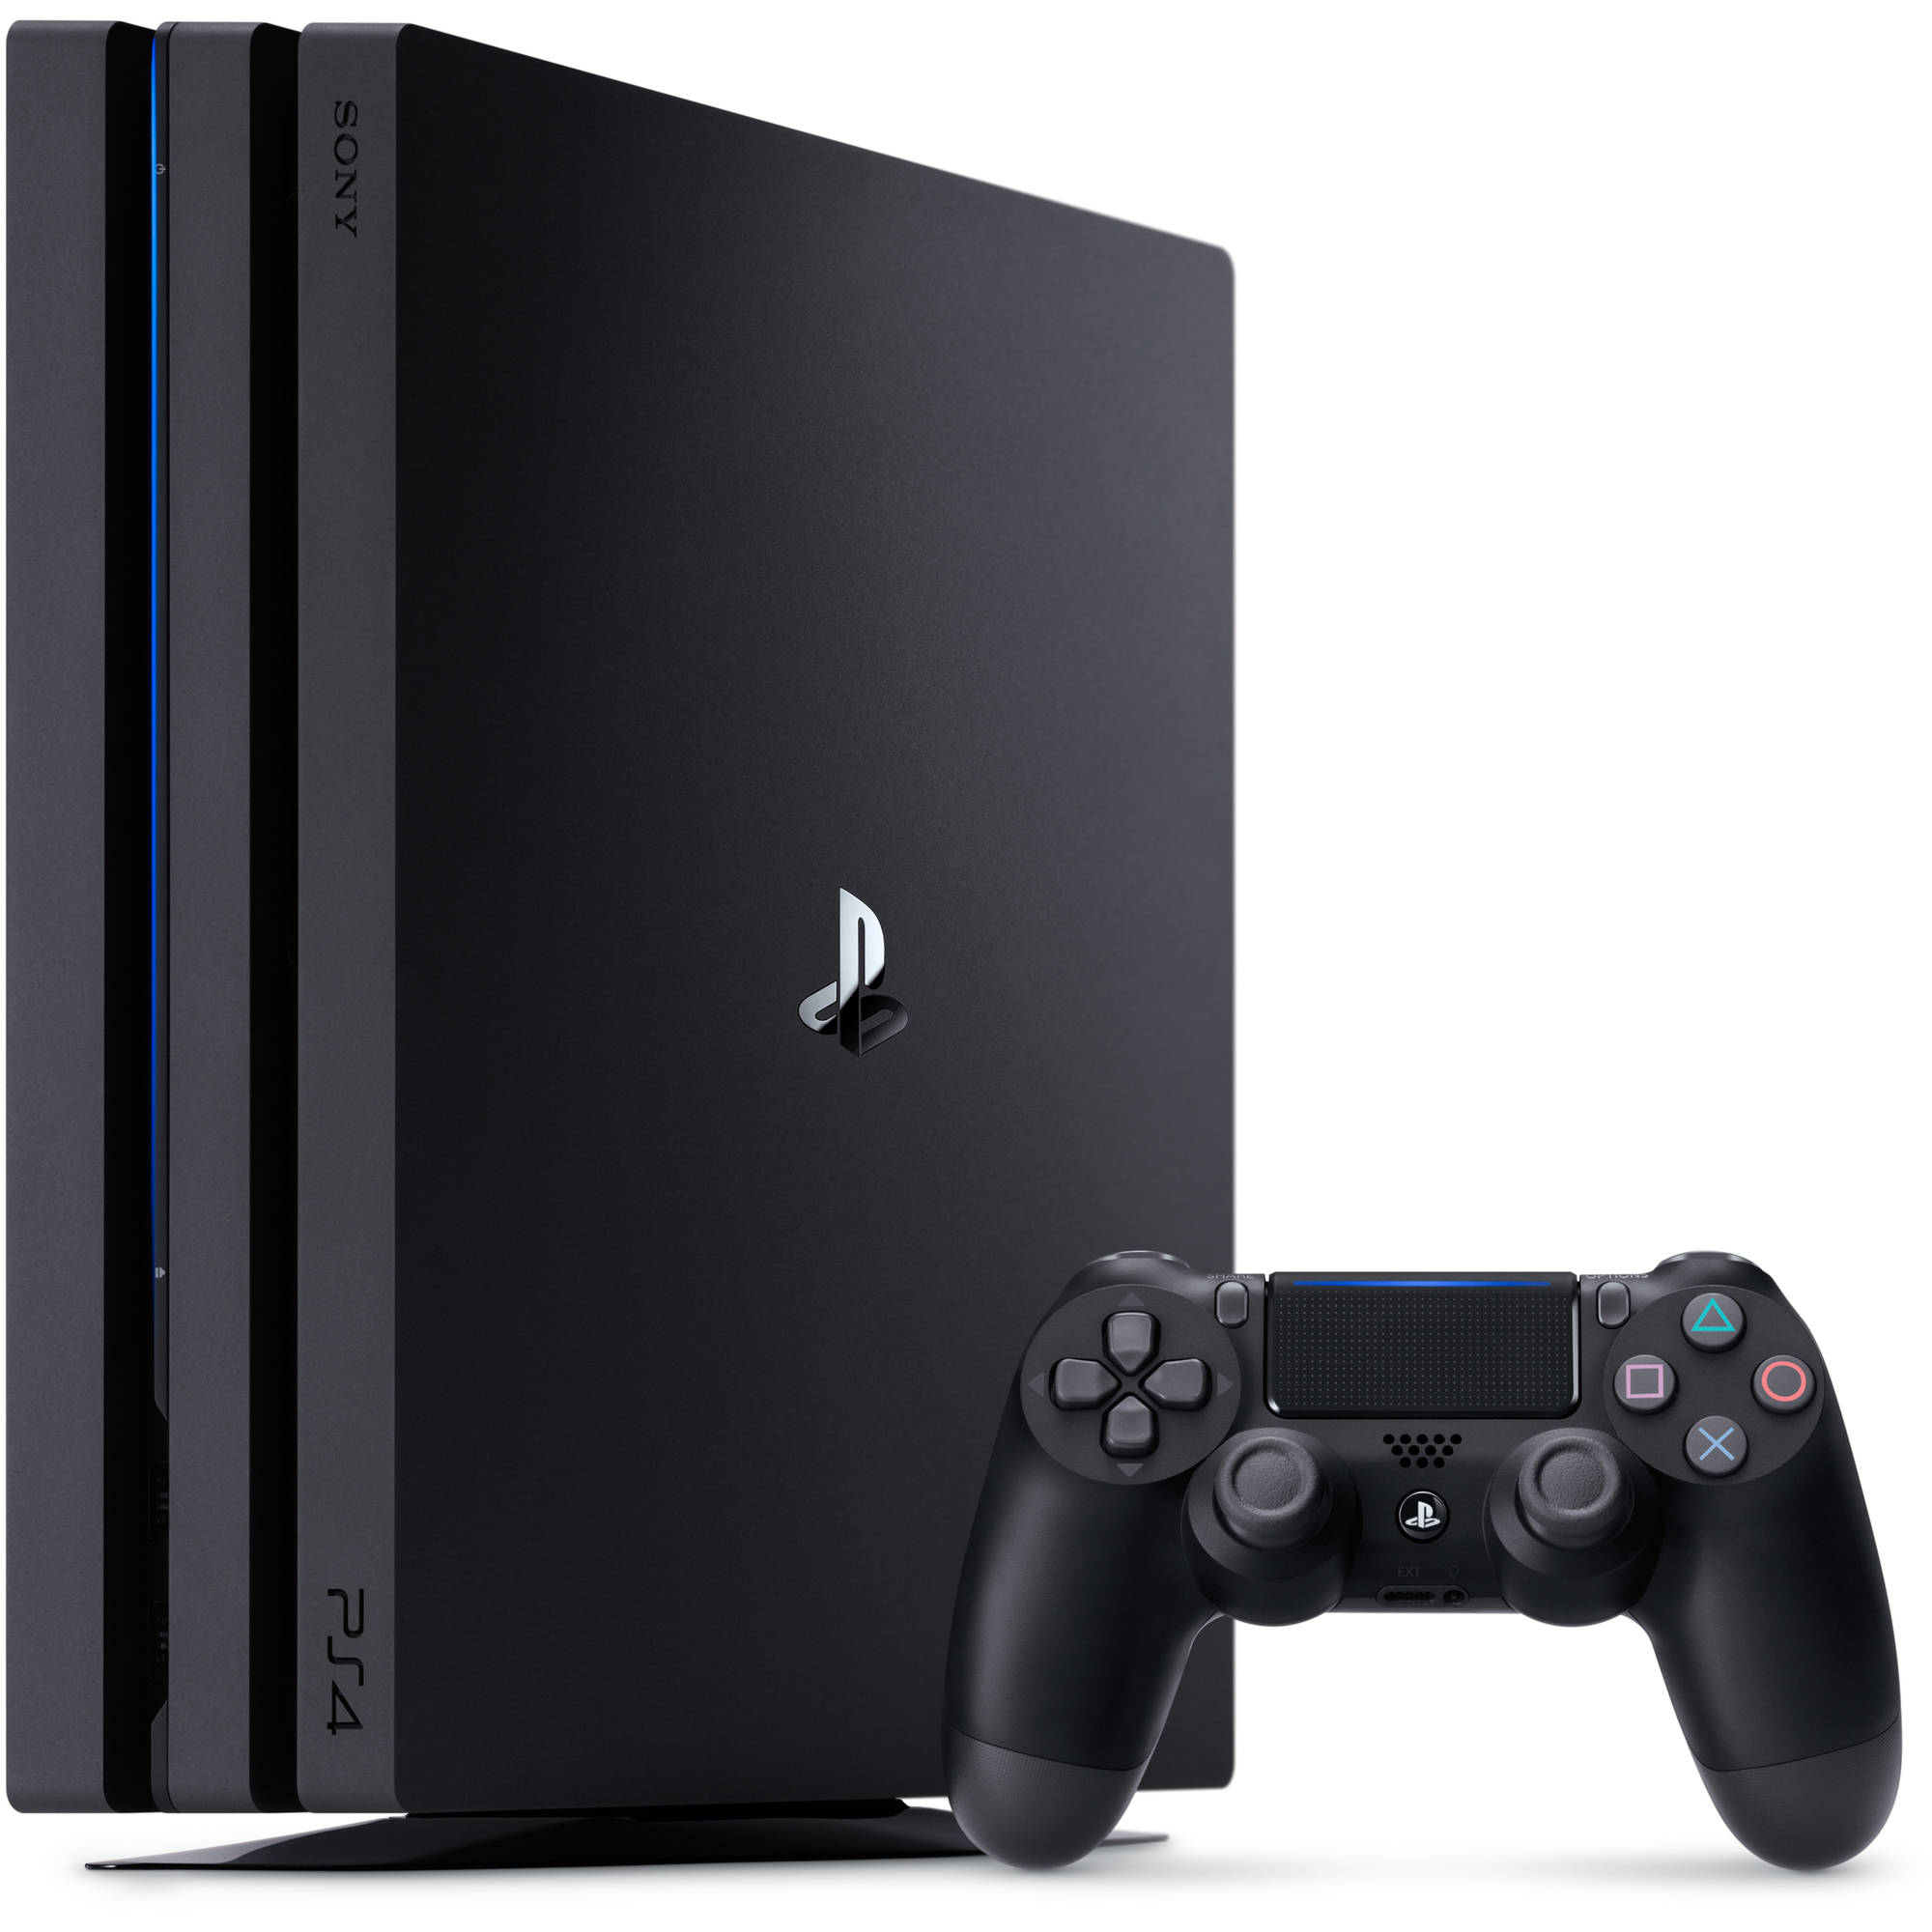 Restored Sony PlayStation 4 Pro 1TB Console, Black, RB3001510 (Refurbished) - image 5 of 5